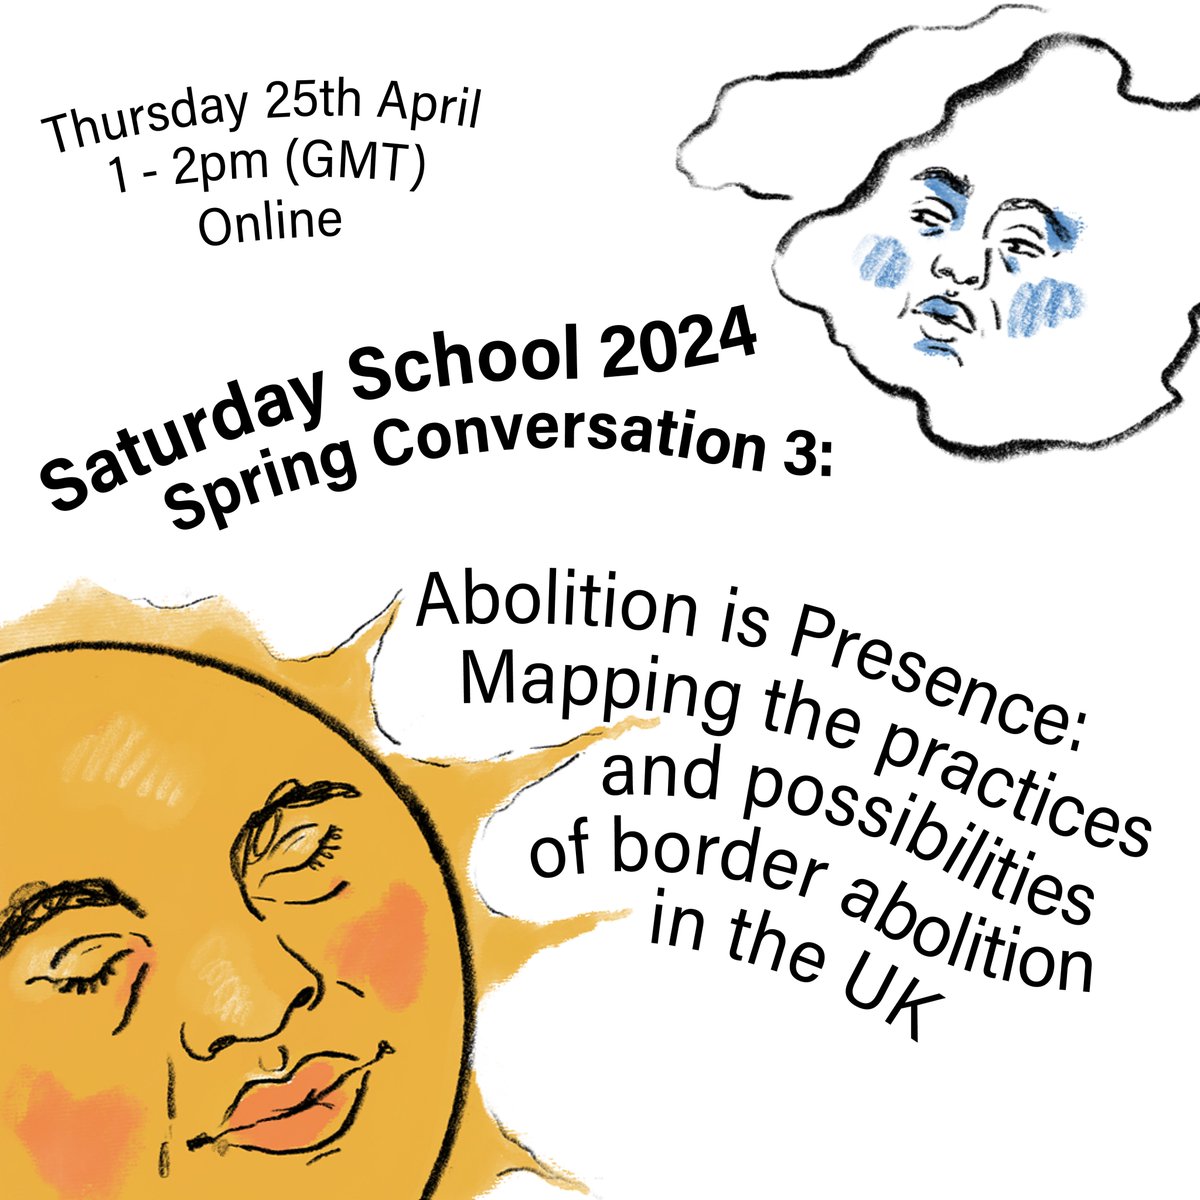 Abolition is Presence: Mapping the practices and possibilities of border abolition in the UK How are migrant and abolitionist organisers building on histories of resistance and experimenting into the future? With: @graciemaybe @cradlecommunity Azfar Shafi @NishmaJethwa (1/2)